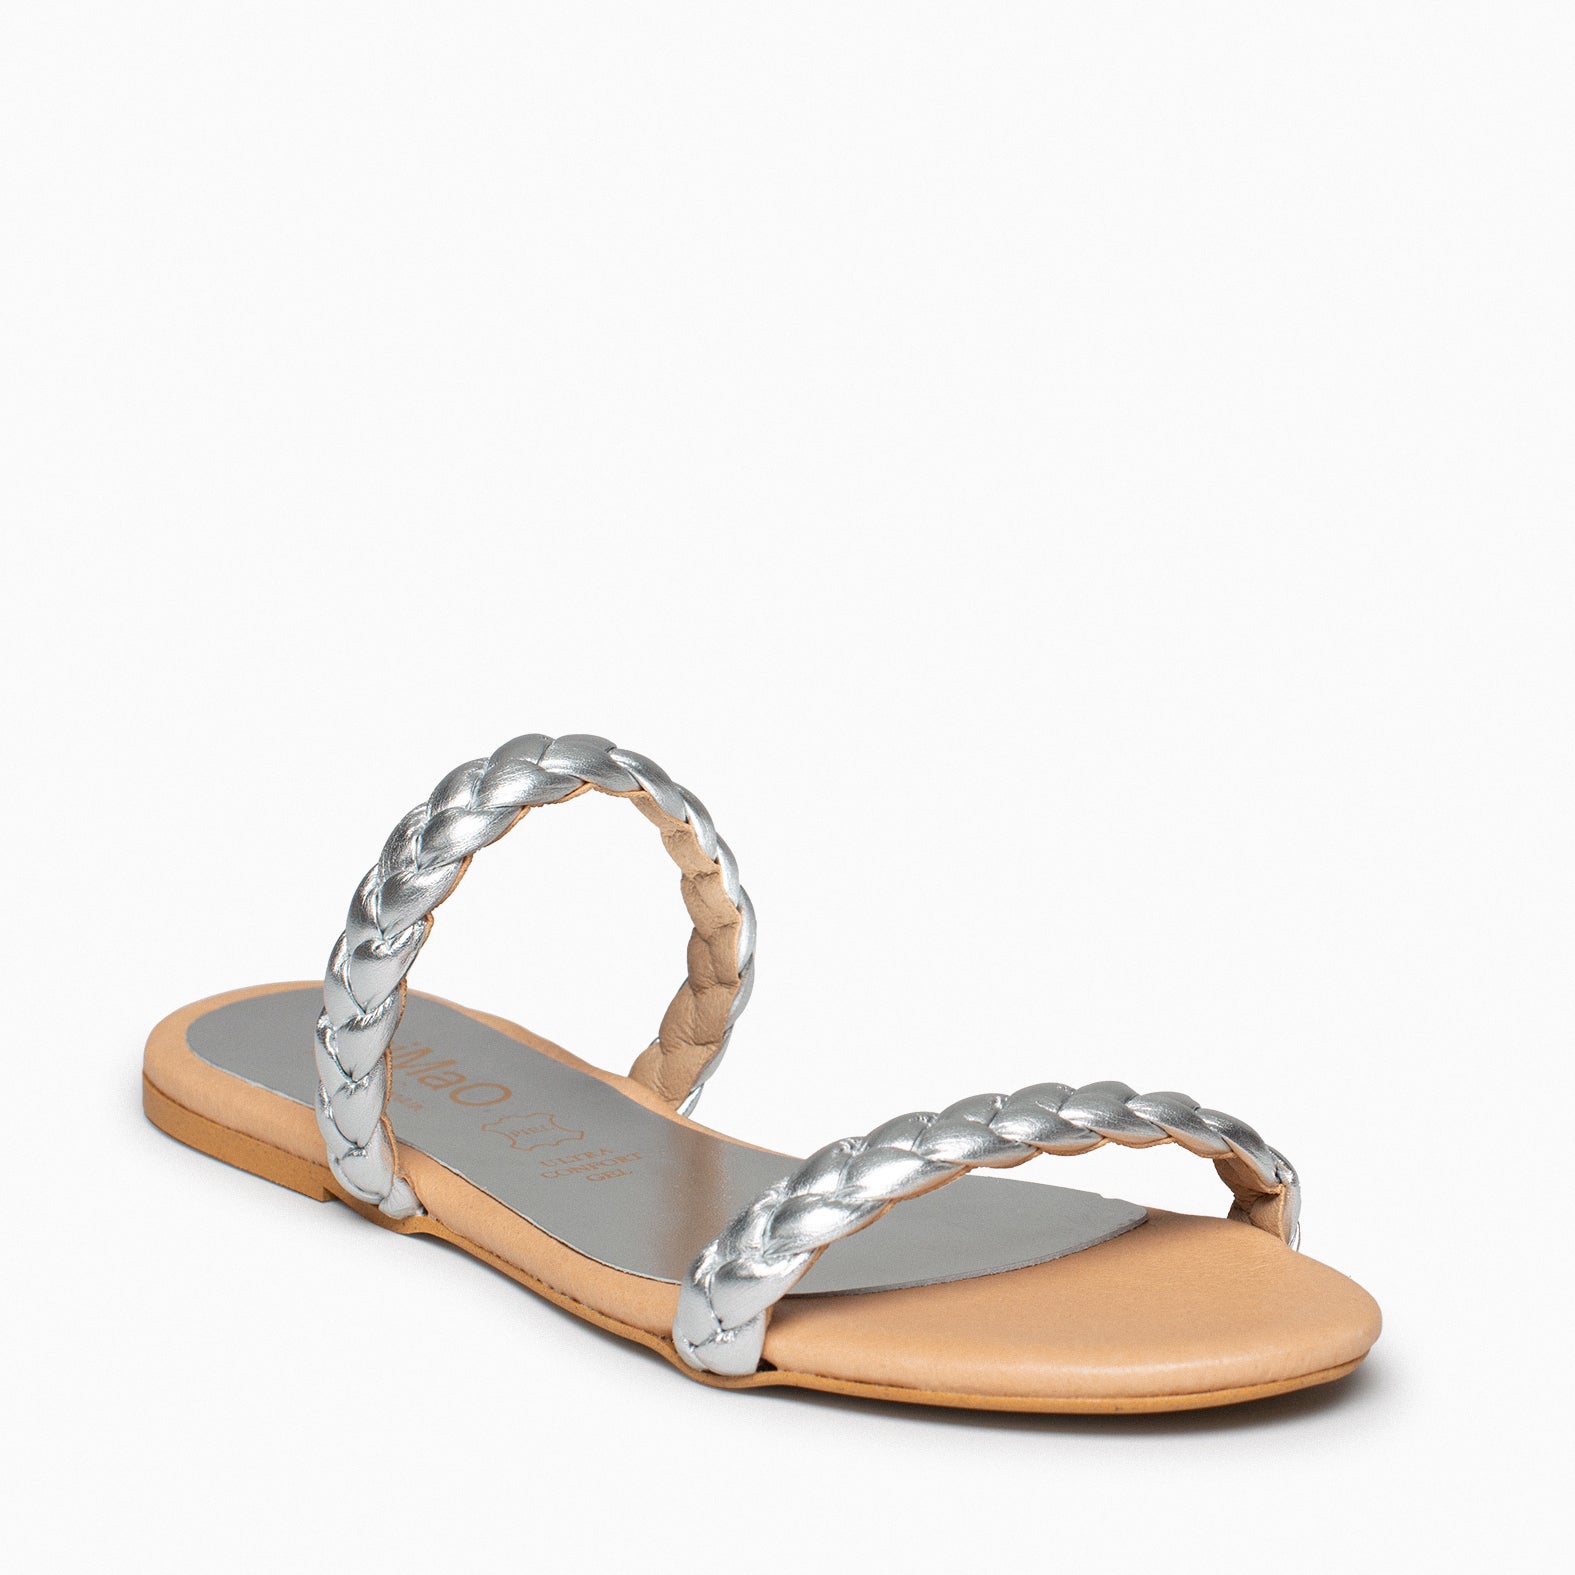 DAILY – SILVER FLAT SANDAL WITH BRAIDS